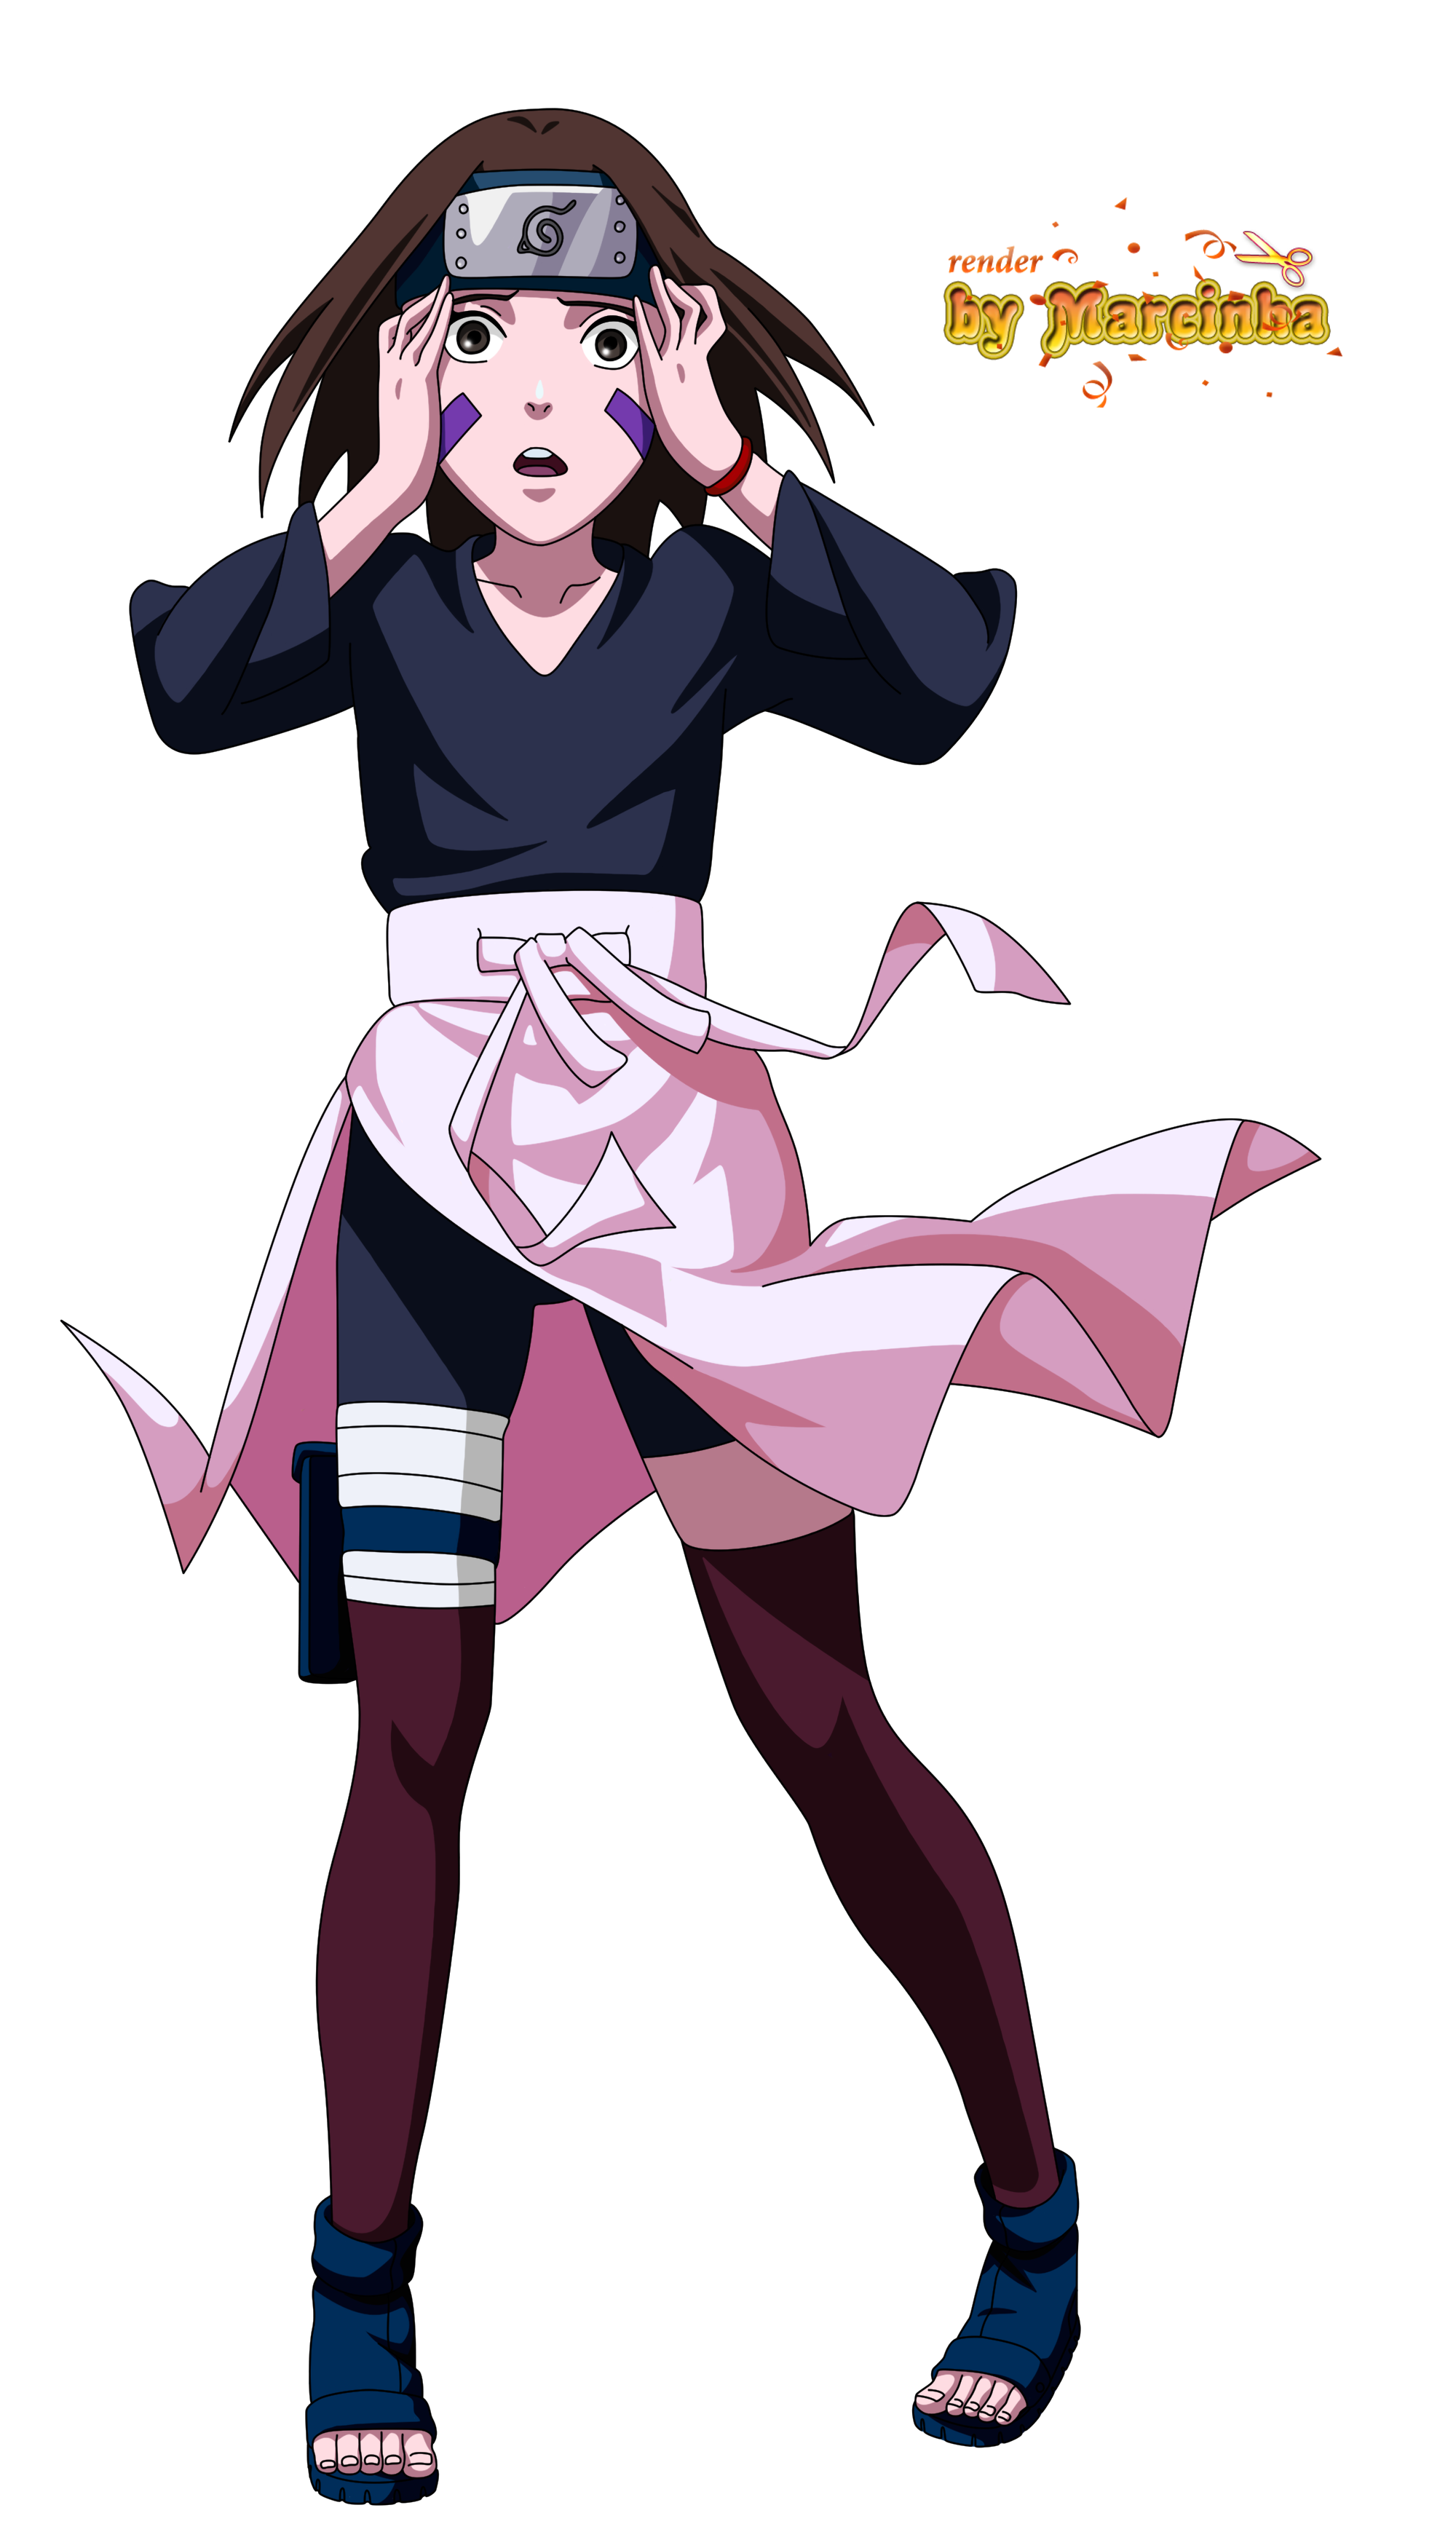 Naruto - Rin Nohara PACK 1 FOR XPS!! by MVegeta on DeviantArt